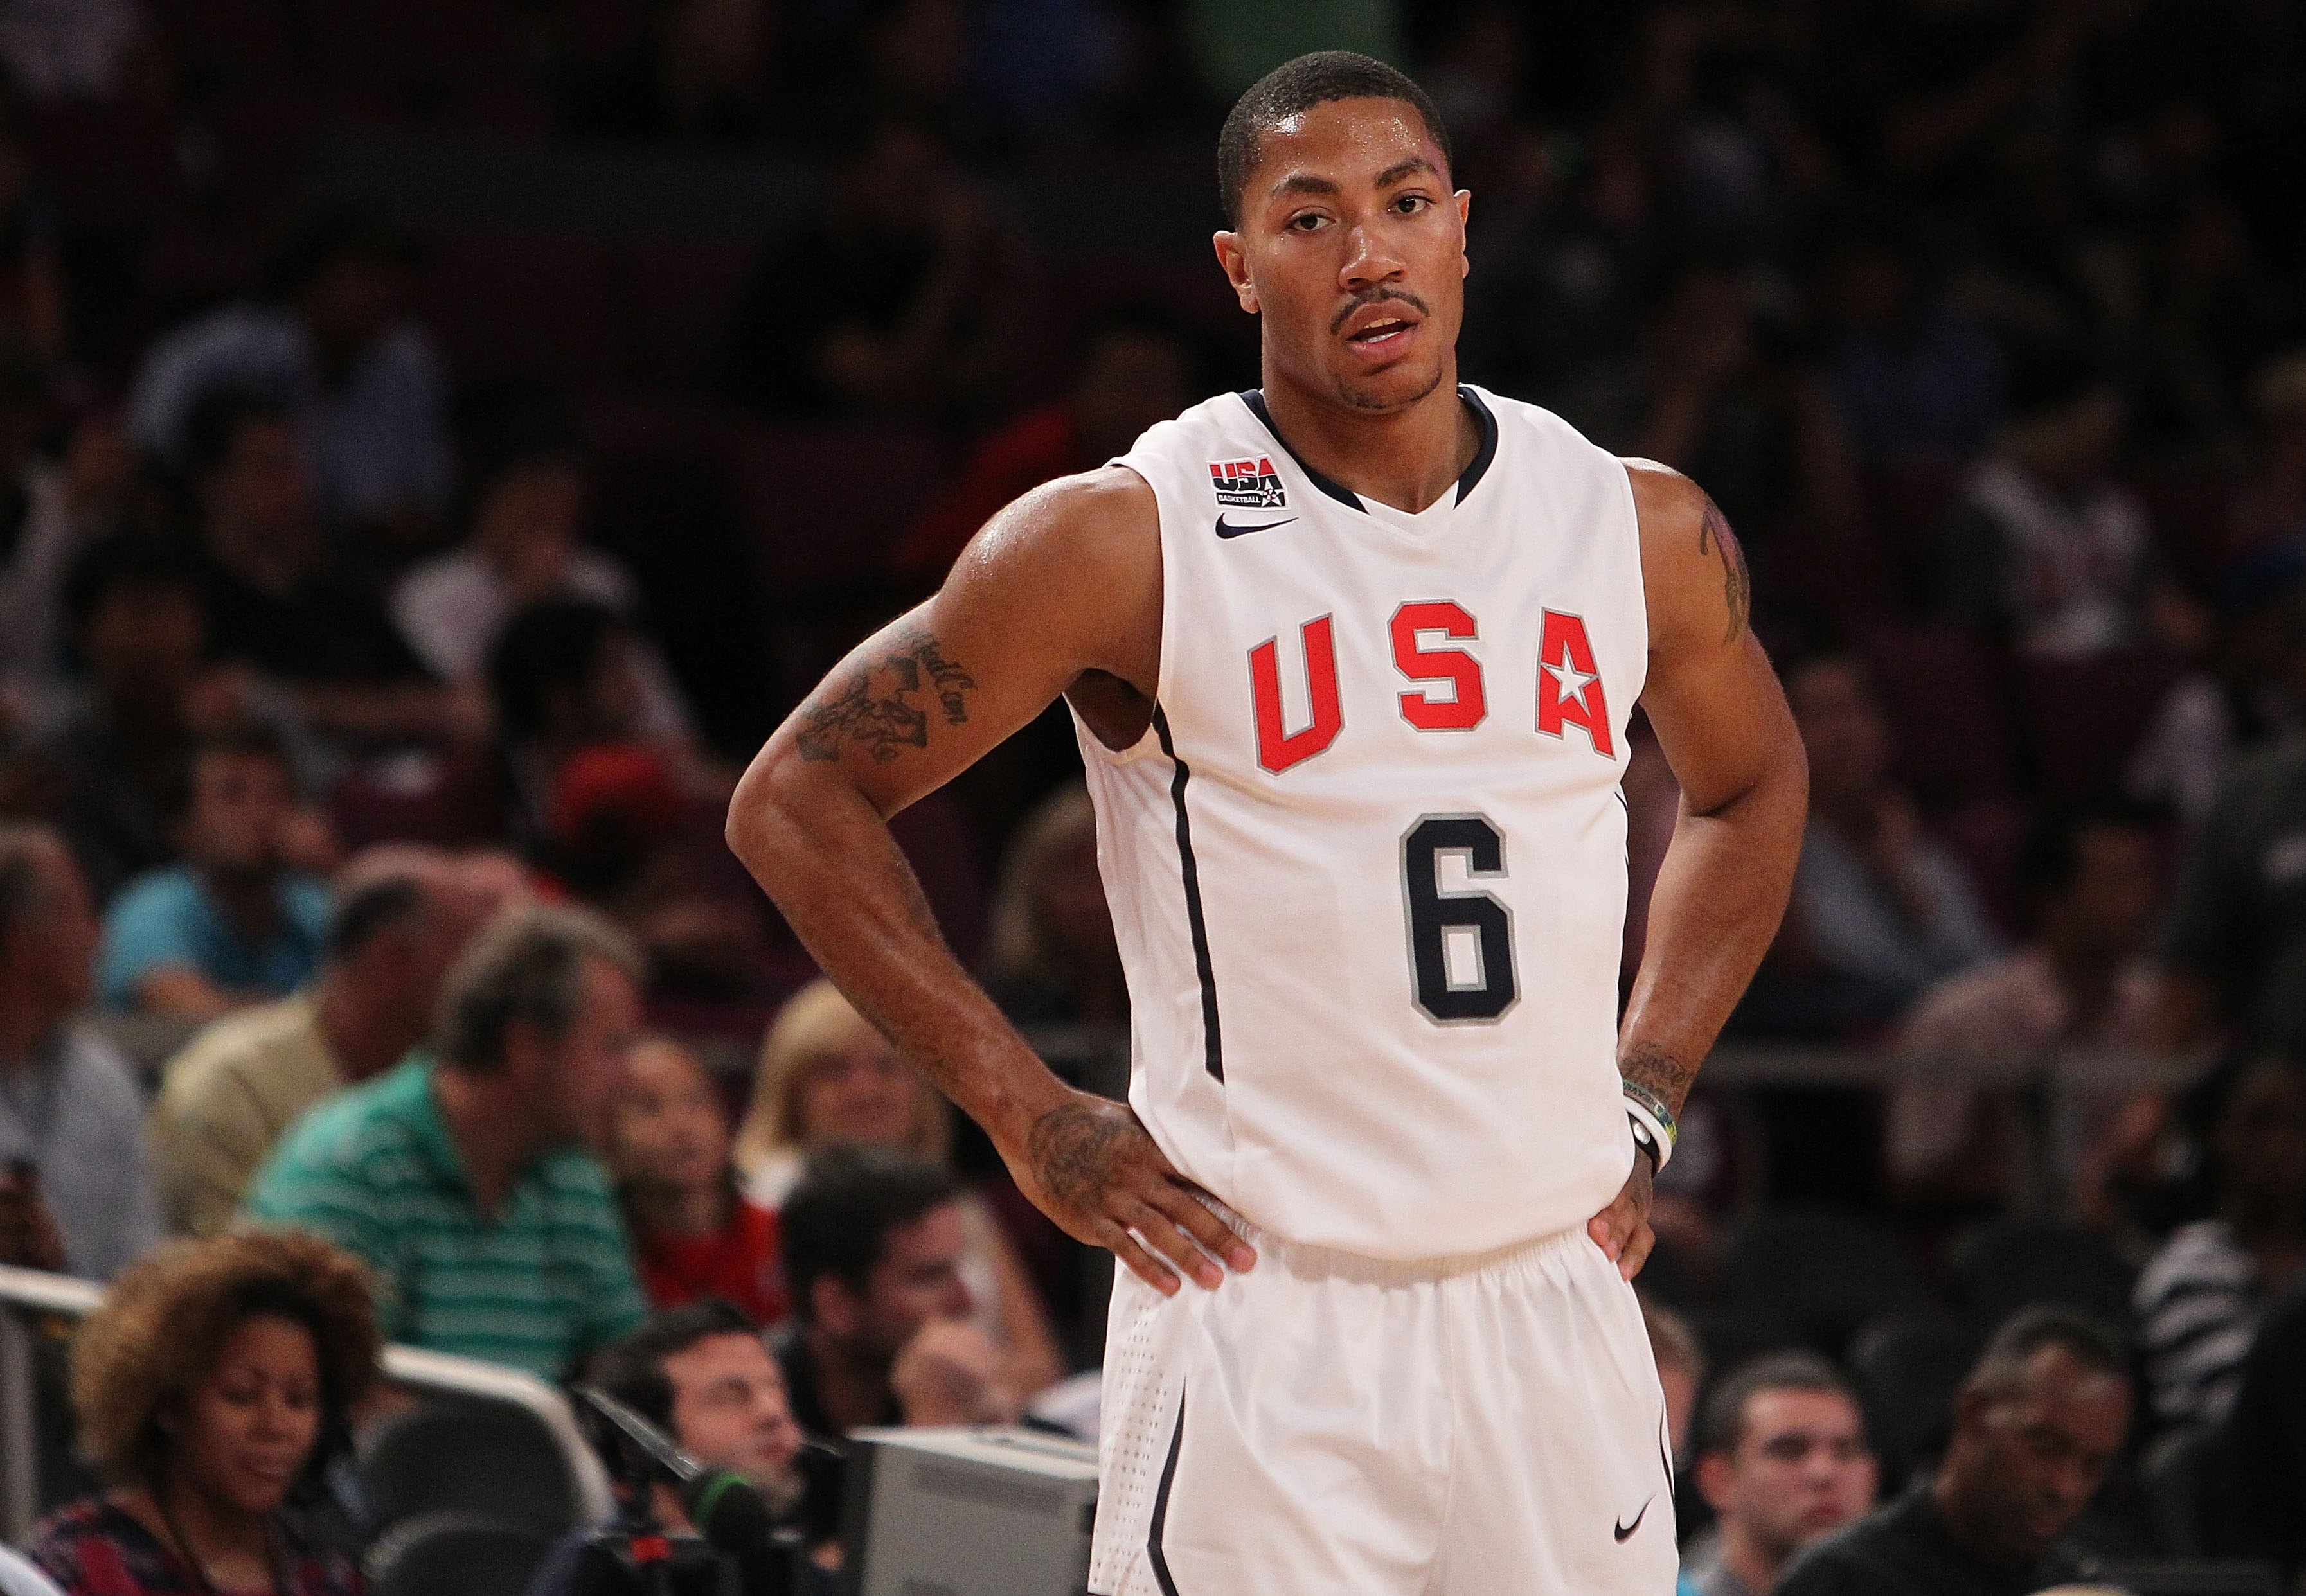 NEW YORK - AUGUST 15:  Derrick Rose #6 of the United States against France during their exhibition game as part of the World Basketball Festival at Madison Square Garden on August 15, 2010 in New York City.  (Photo by Nick Laham/Getty Images)